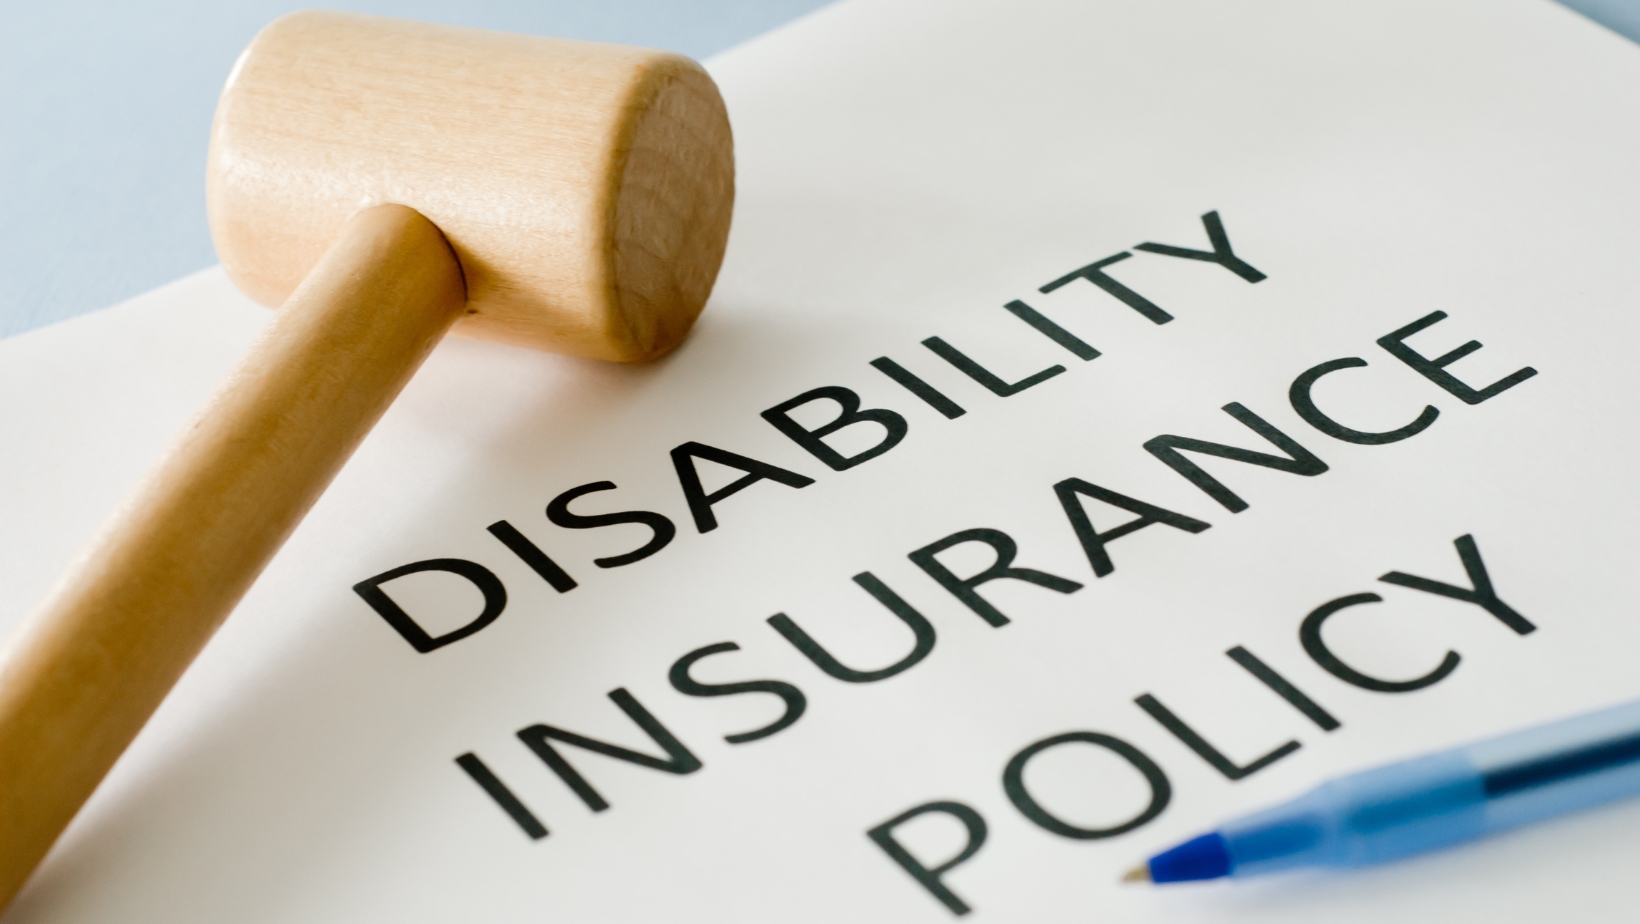 premium payments for personally-owned disability income policies are